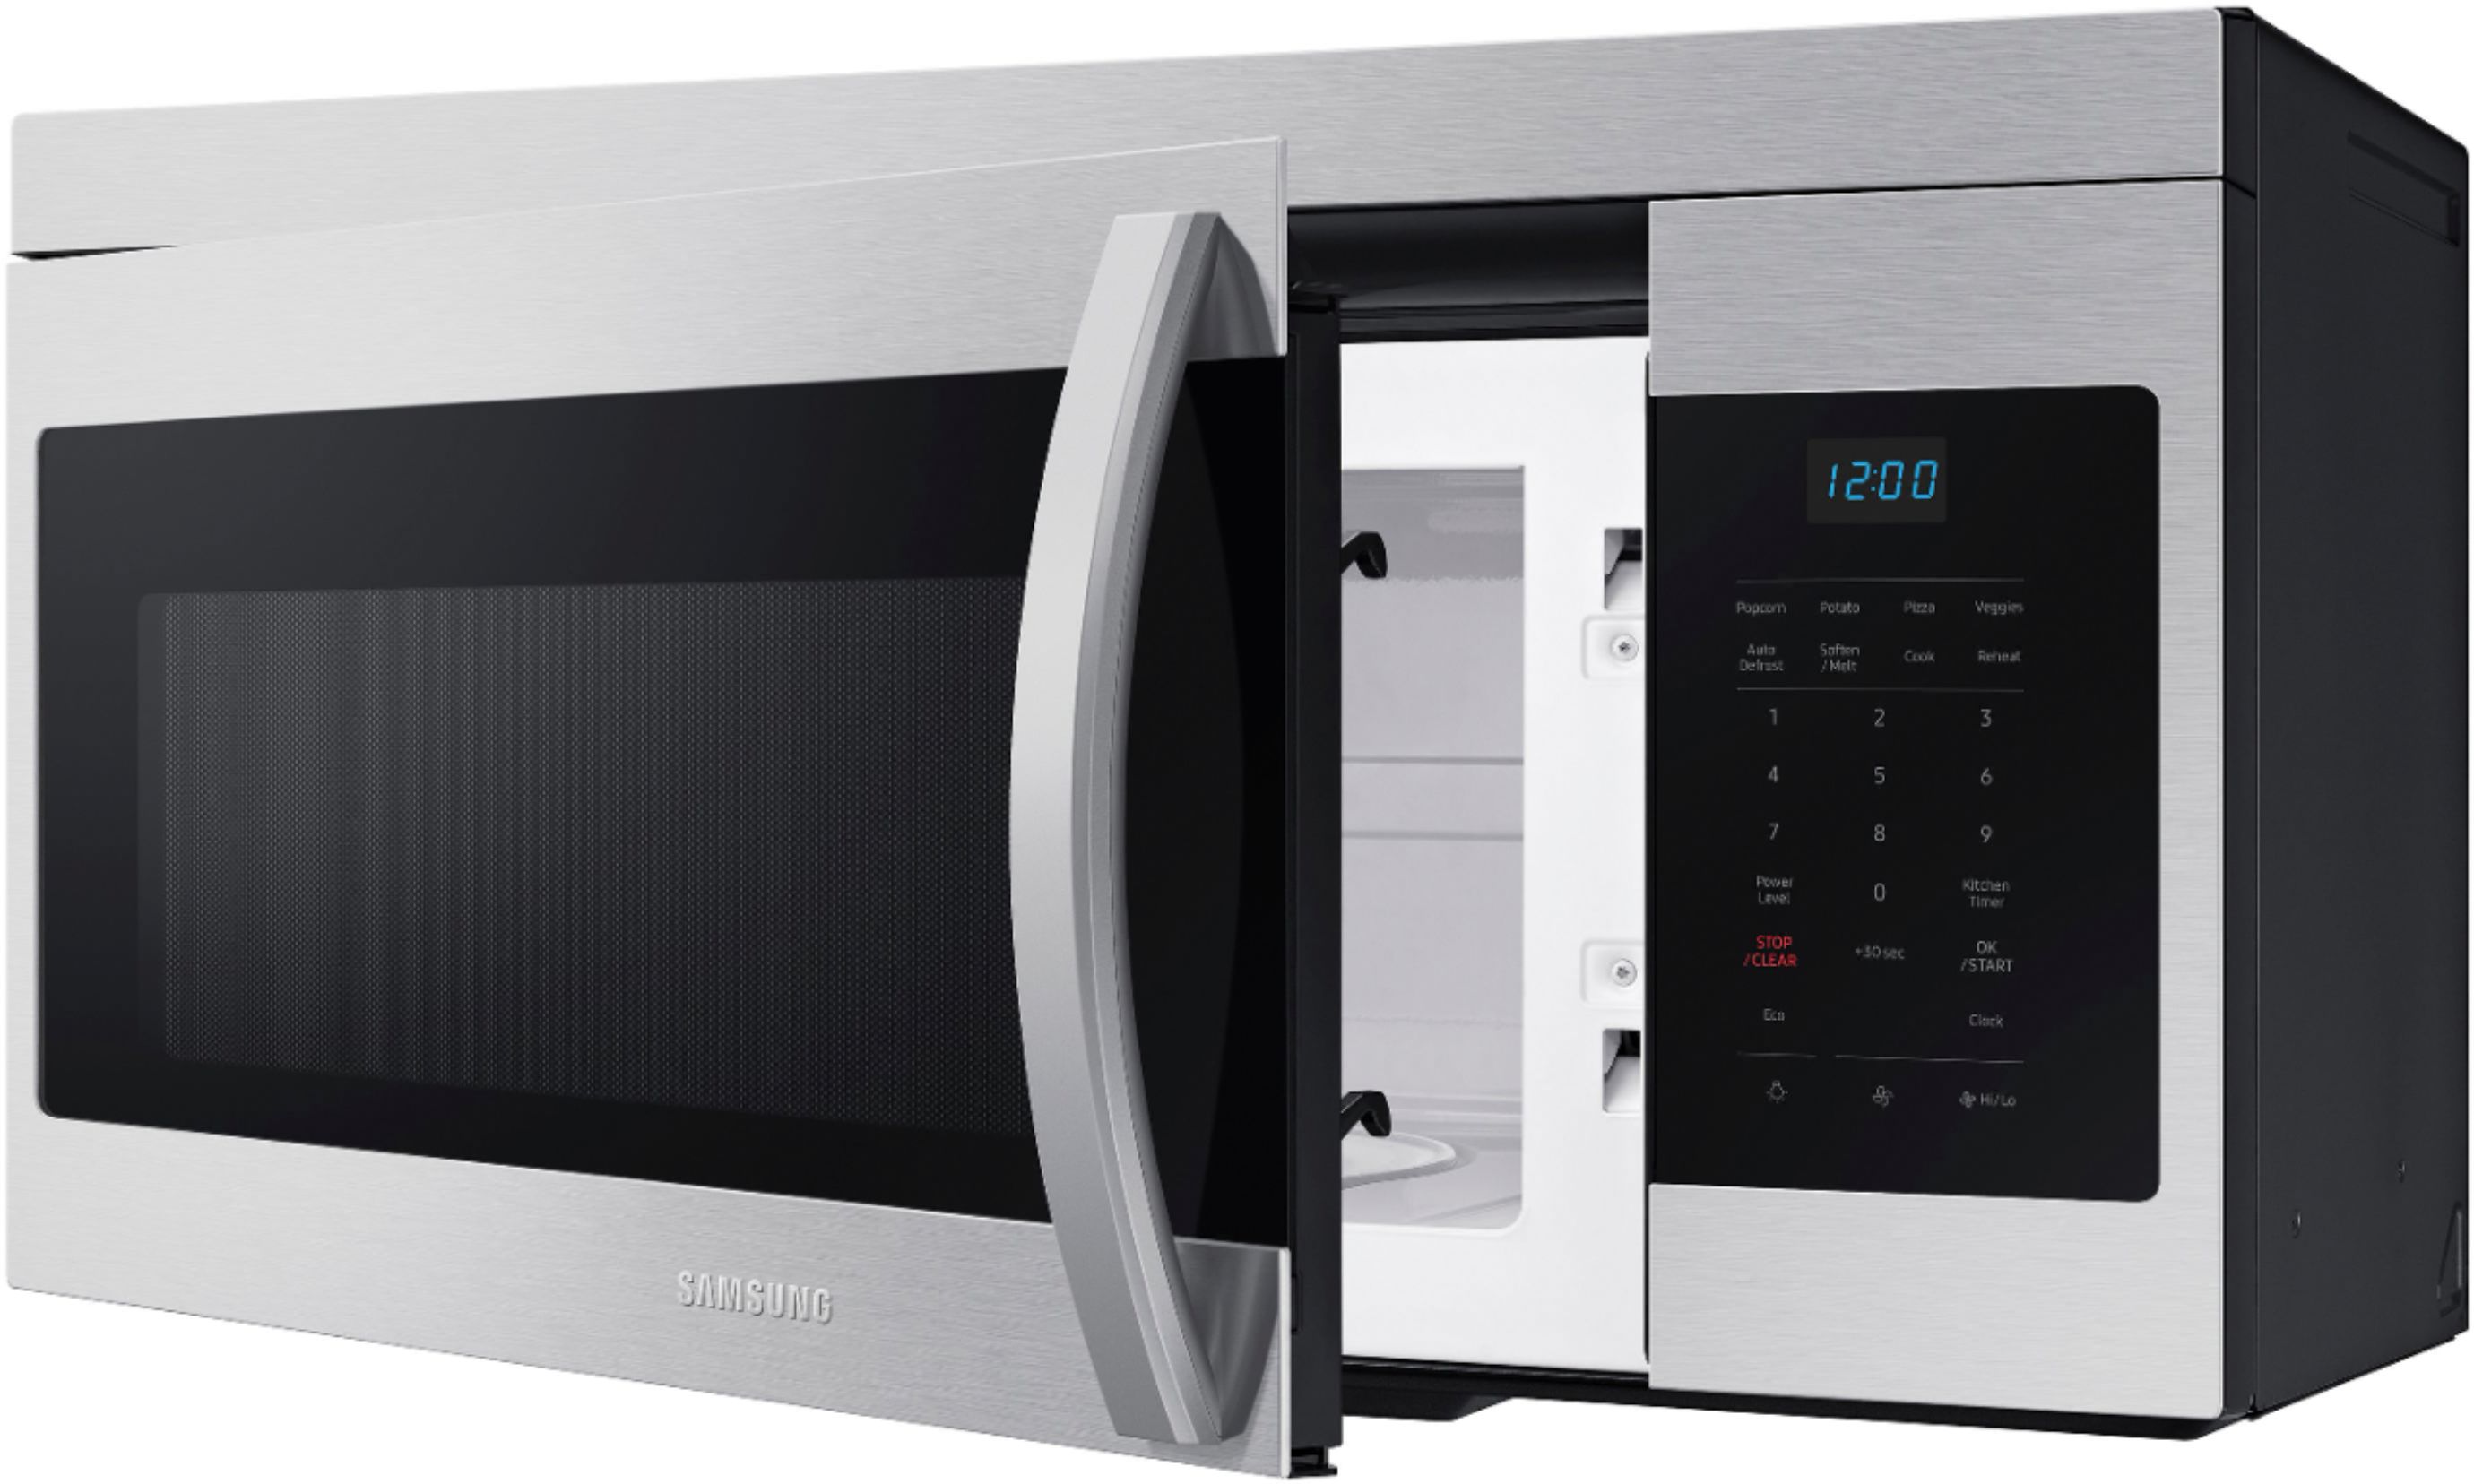 Samsung ME16A4021AS 1.6 Cu. ft. Over-the-range Microwave with Auto Cook in Stainless Steel